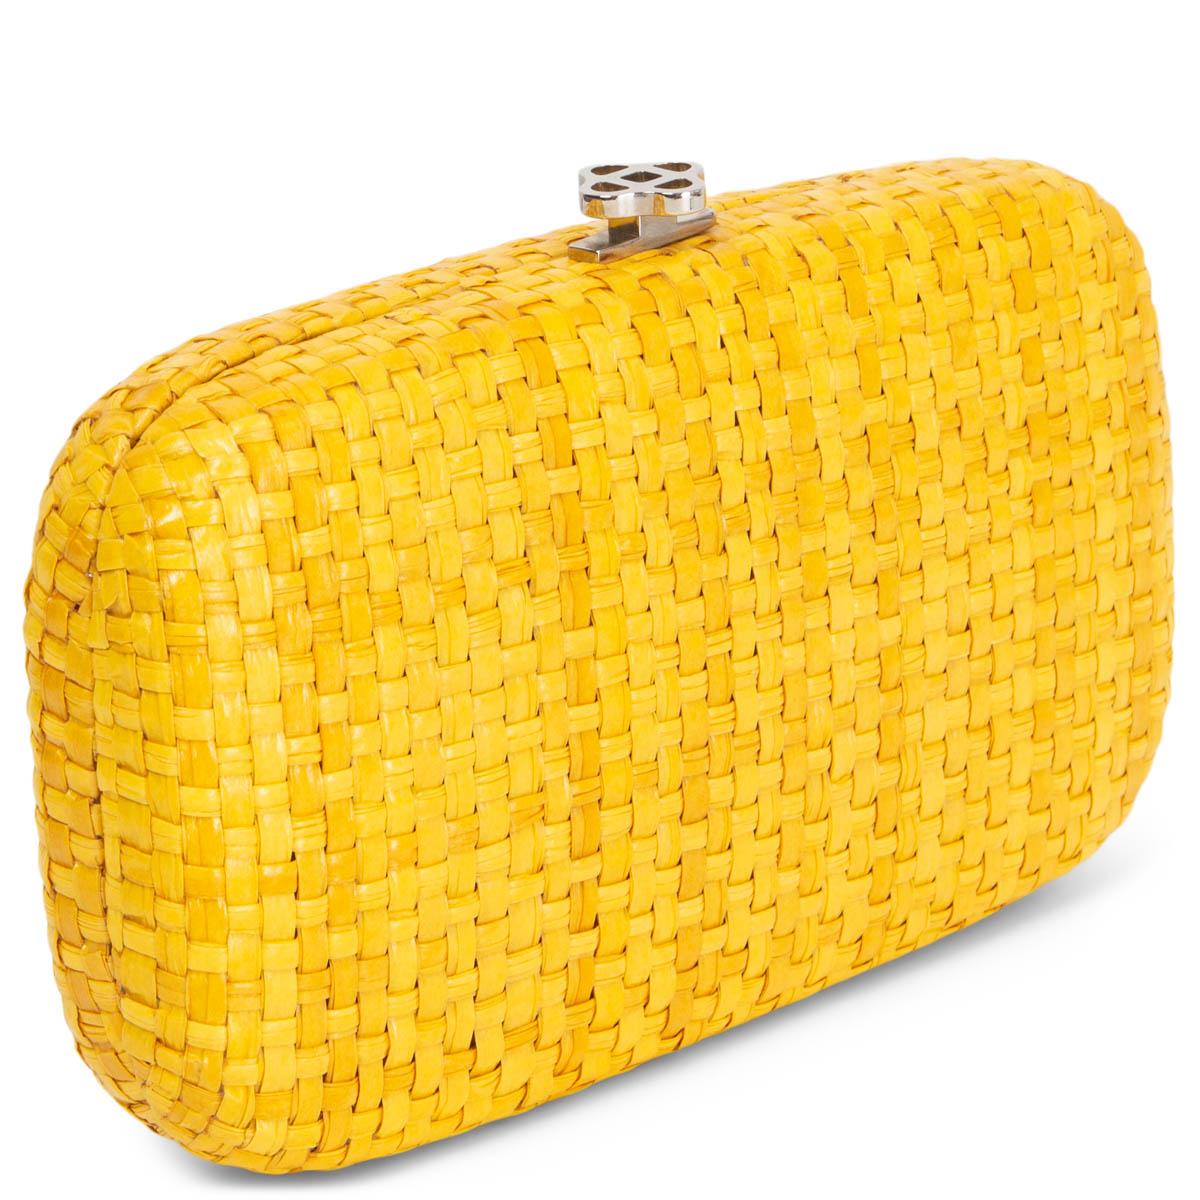 100% authentic Oscar de la Renta box clutch in yellow wicker woven raffia featuring a silver-tone metal clasp. Lined in yellow satin. Has been carried and is in excellent condition. Comes with dust bag. 

Measurements
Height	10cm (3.9in)
Width	17cm